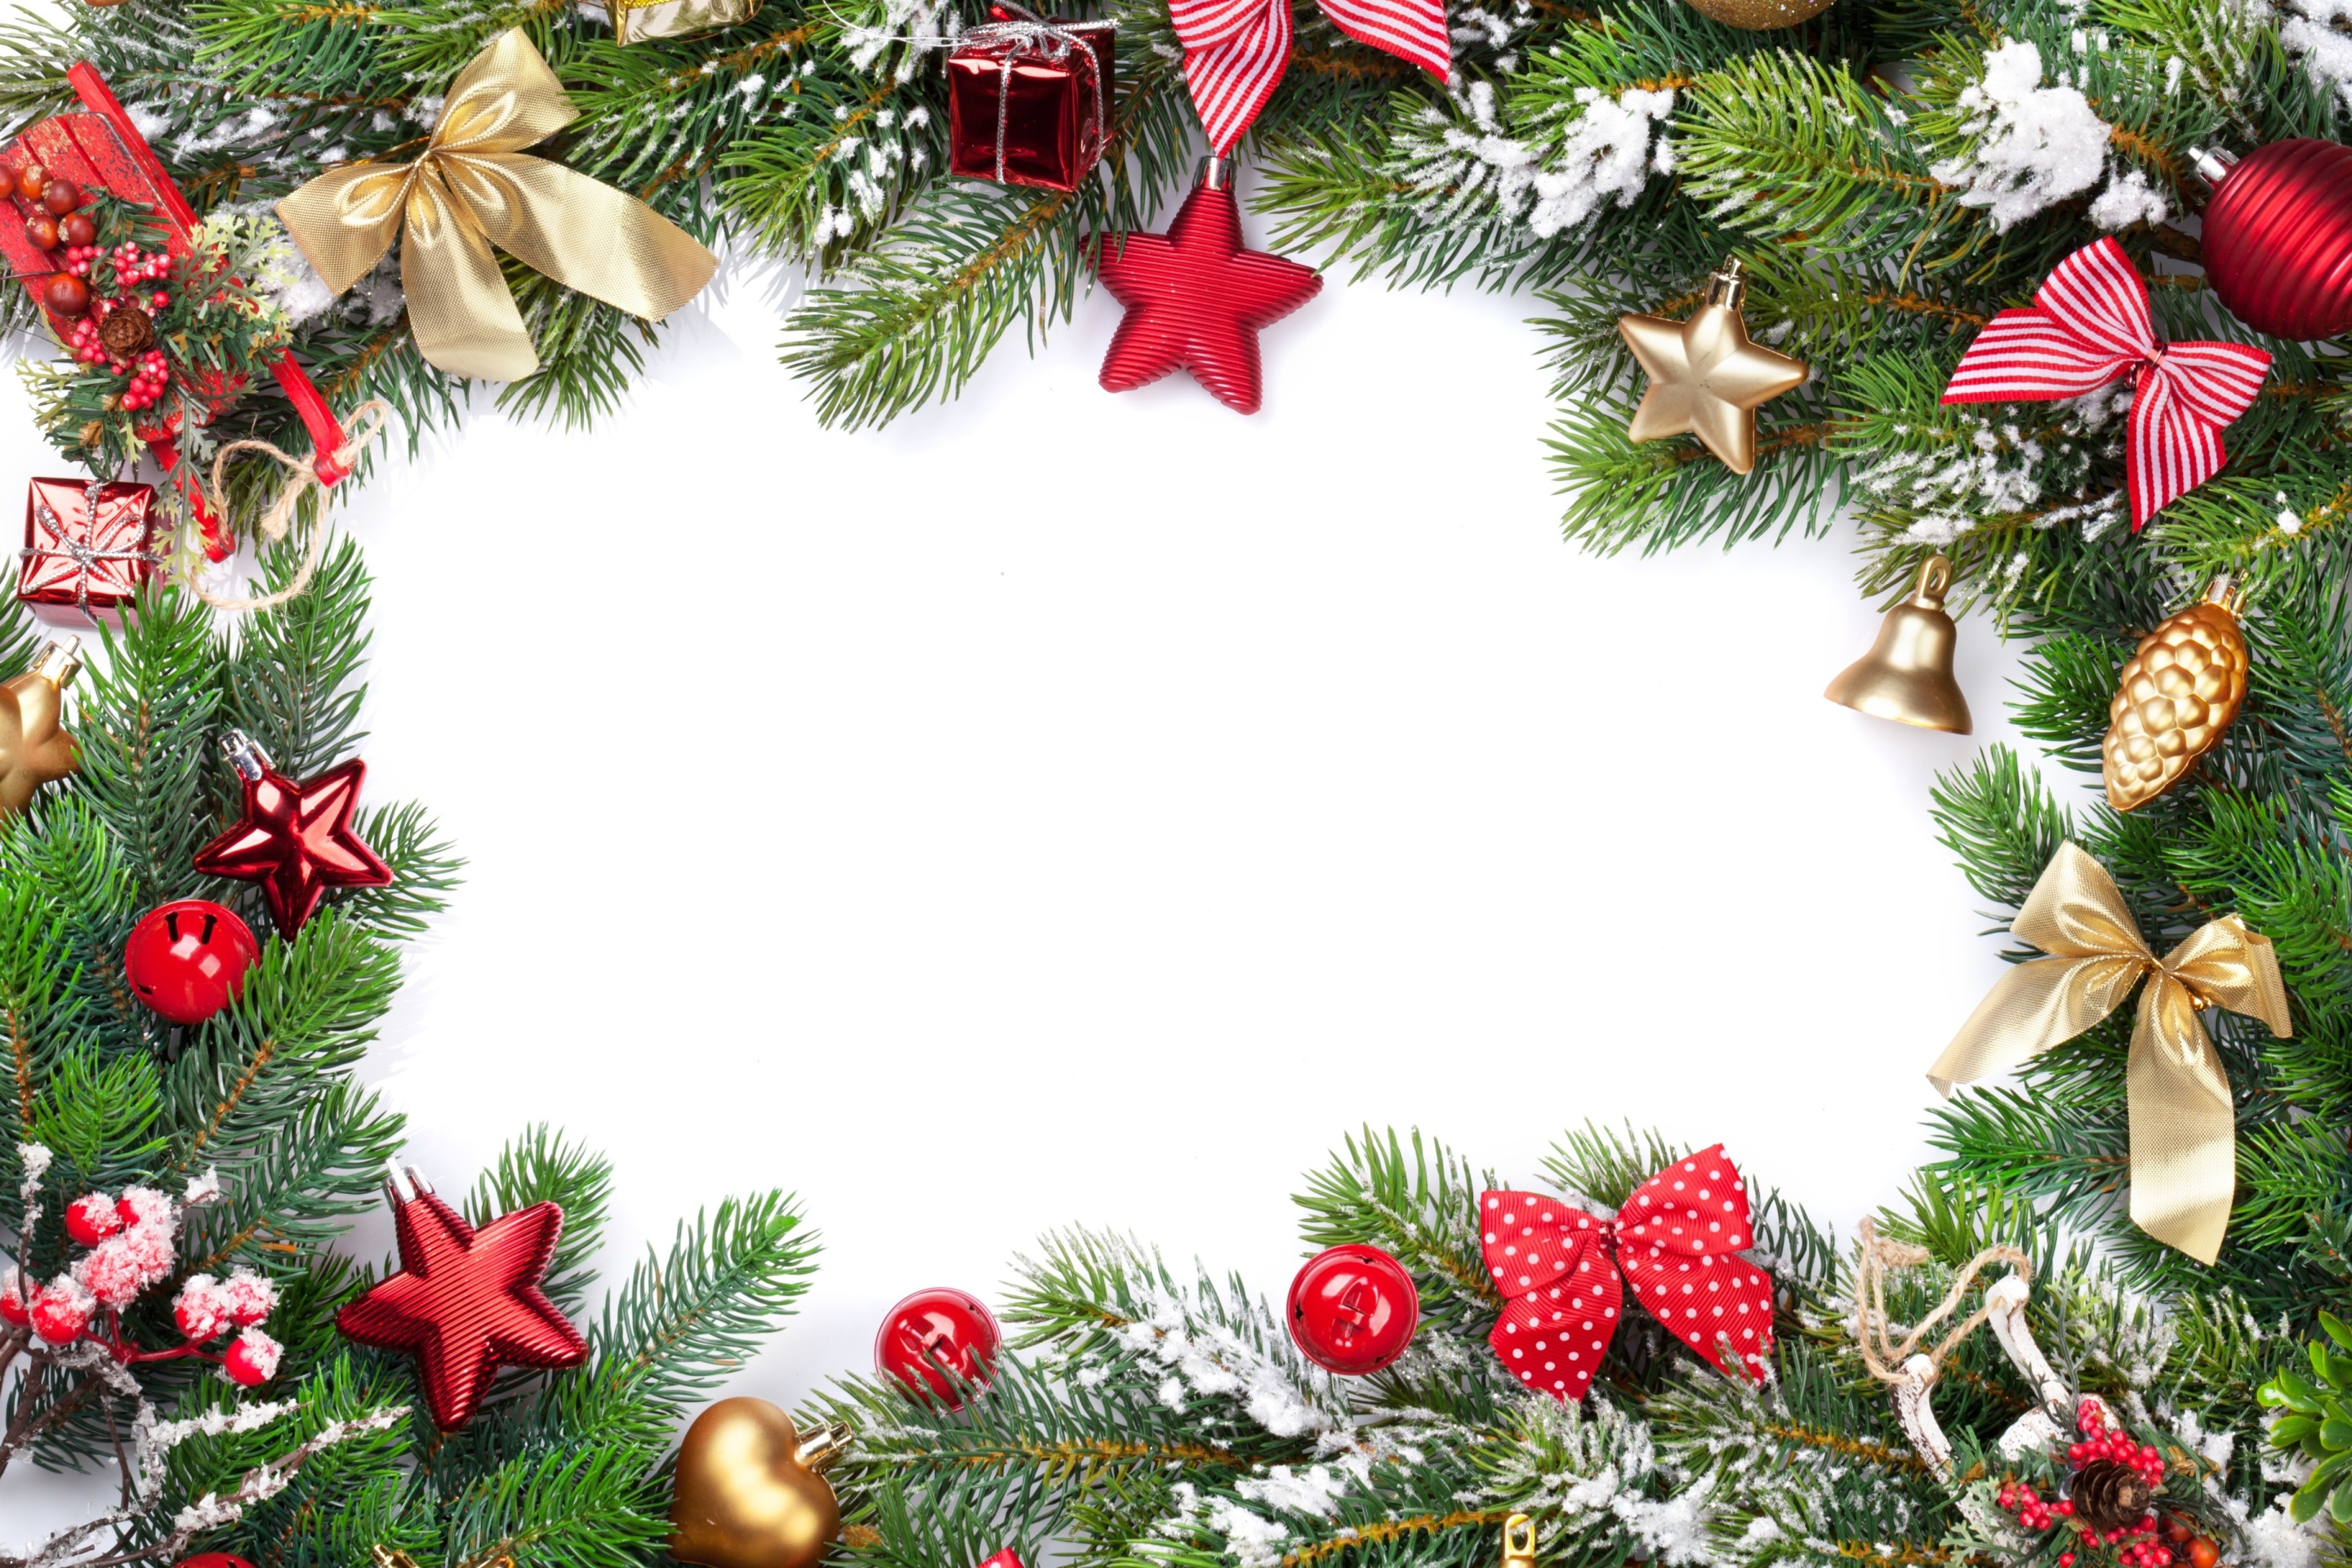 Festival decorate a christmas tree wallpaper 2880x1920